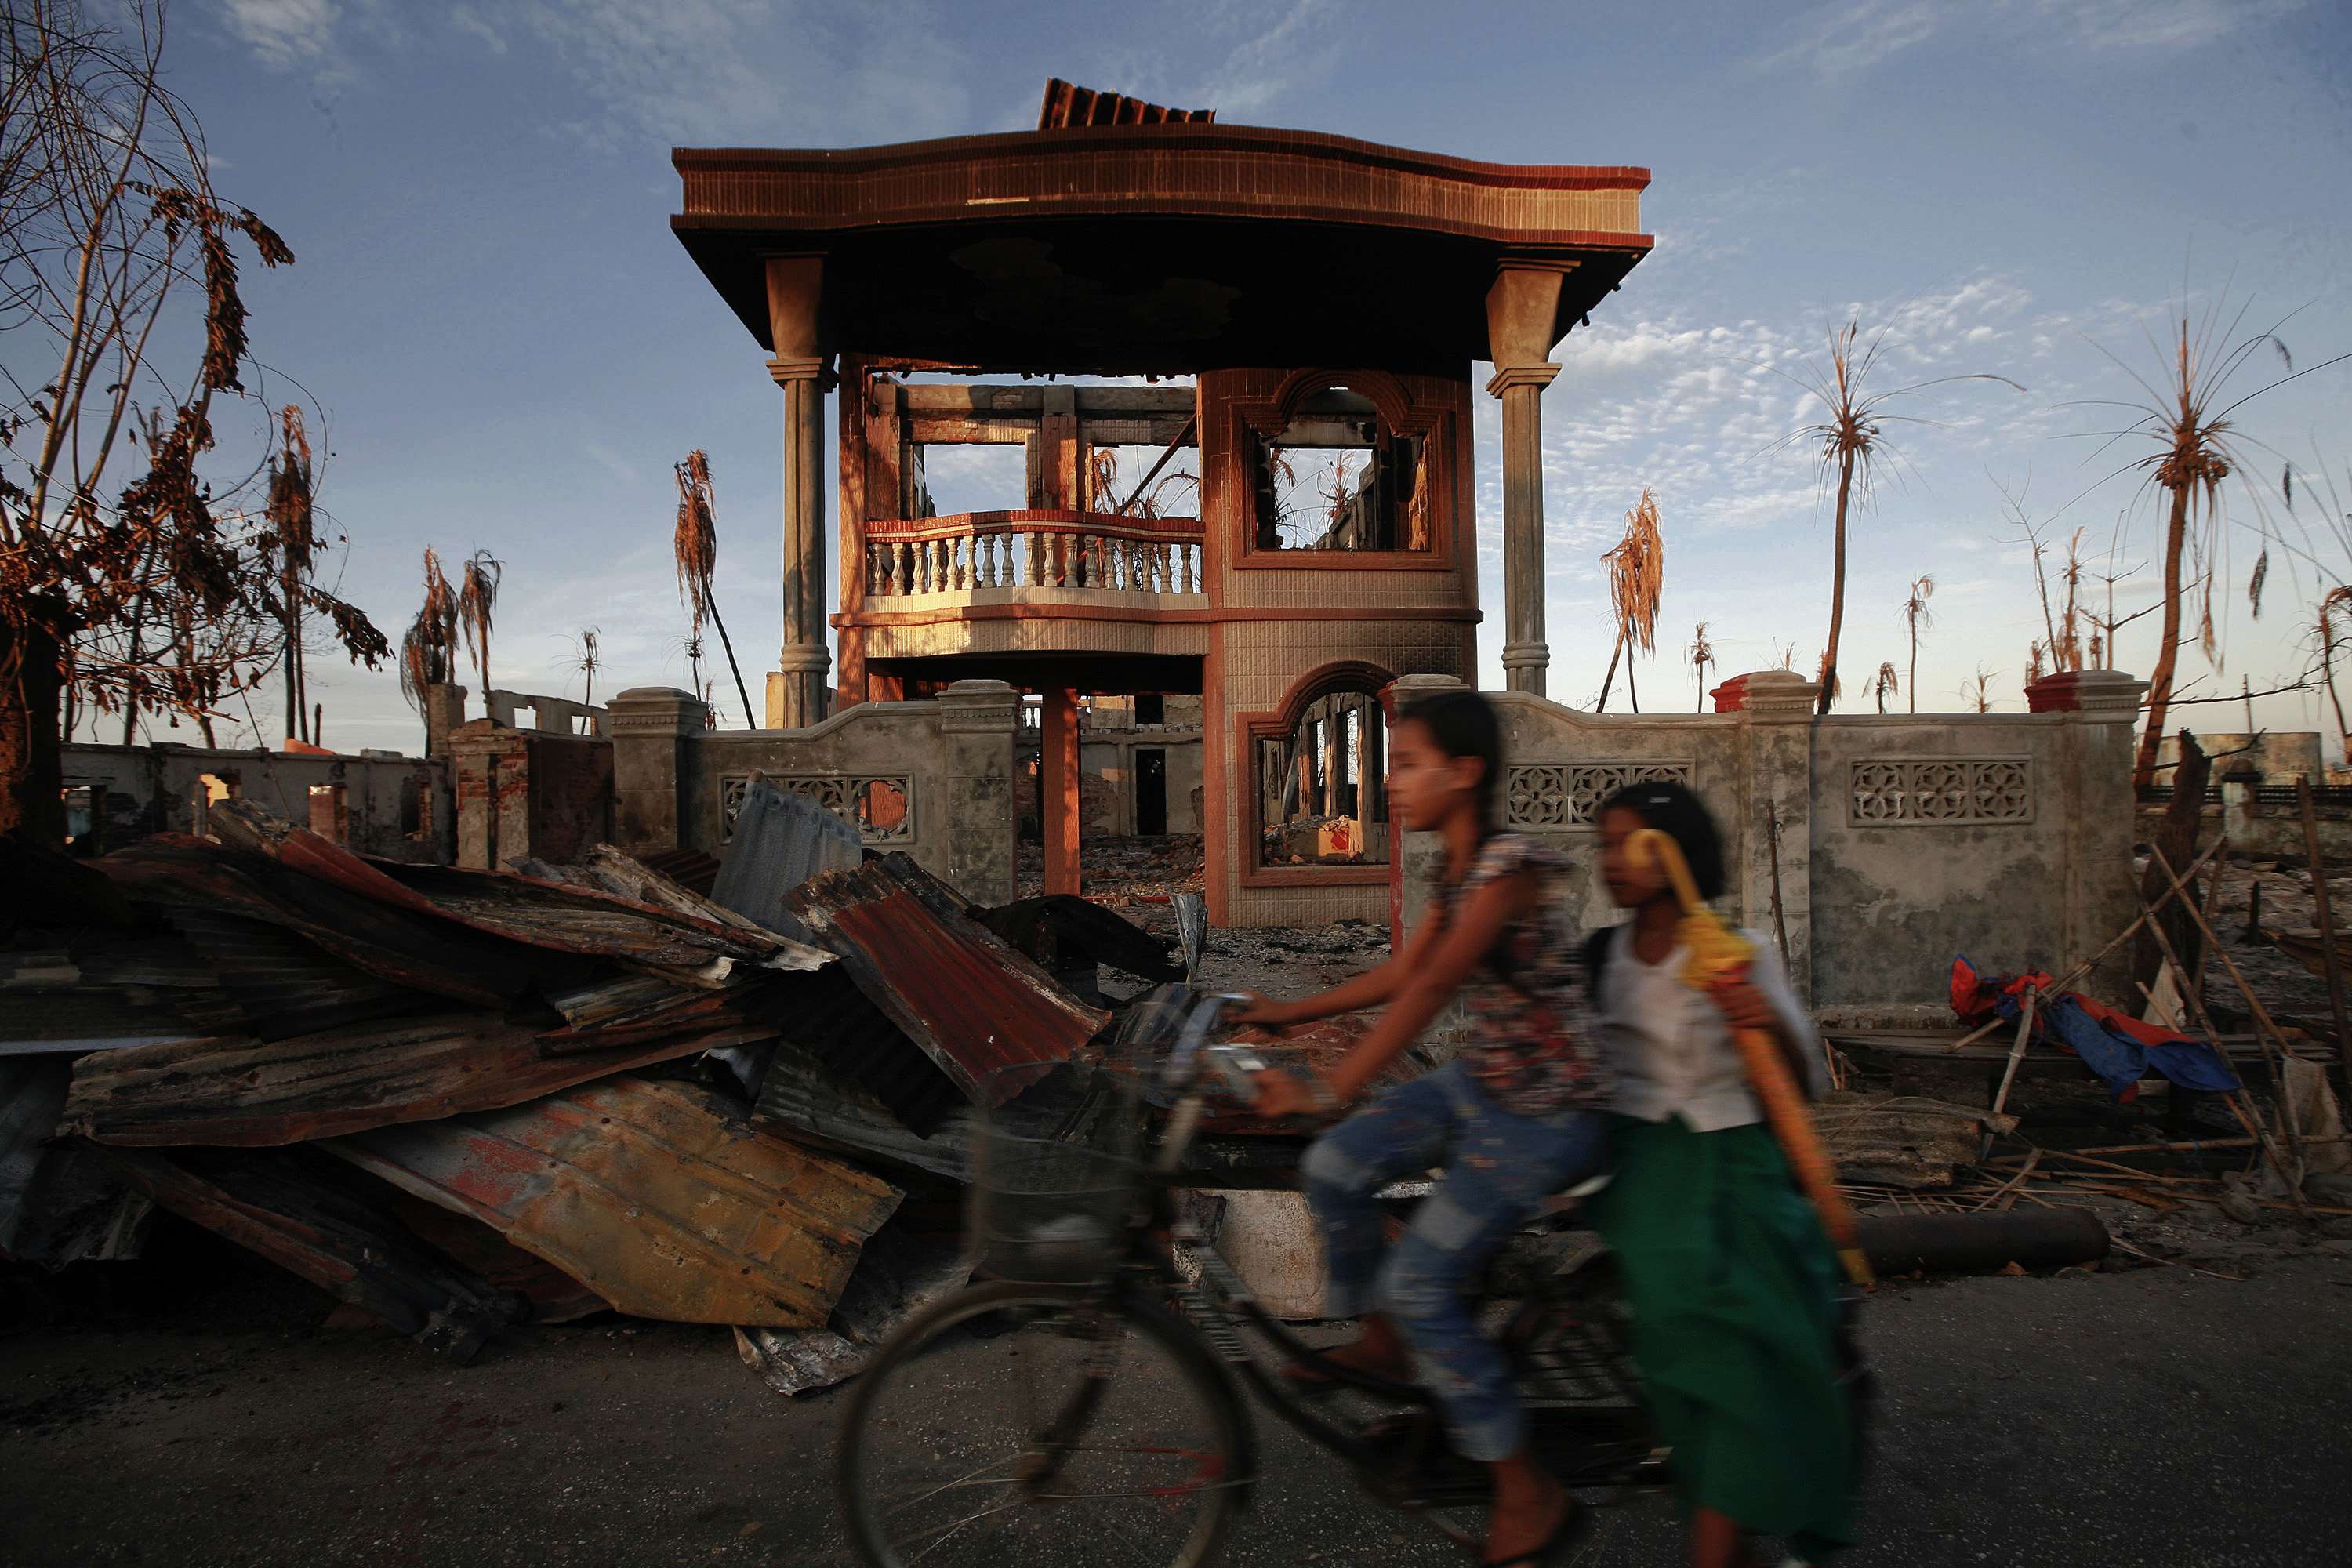 Girls ride a moped past a burnt house during the violence at East Pikesake ward, in Kyaukphyu November 6, 2012. Photo: STRINGER / REUTERS / picturedesk.com